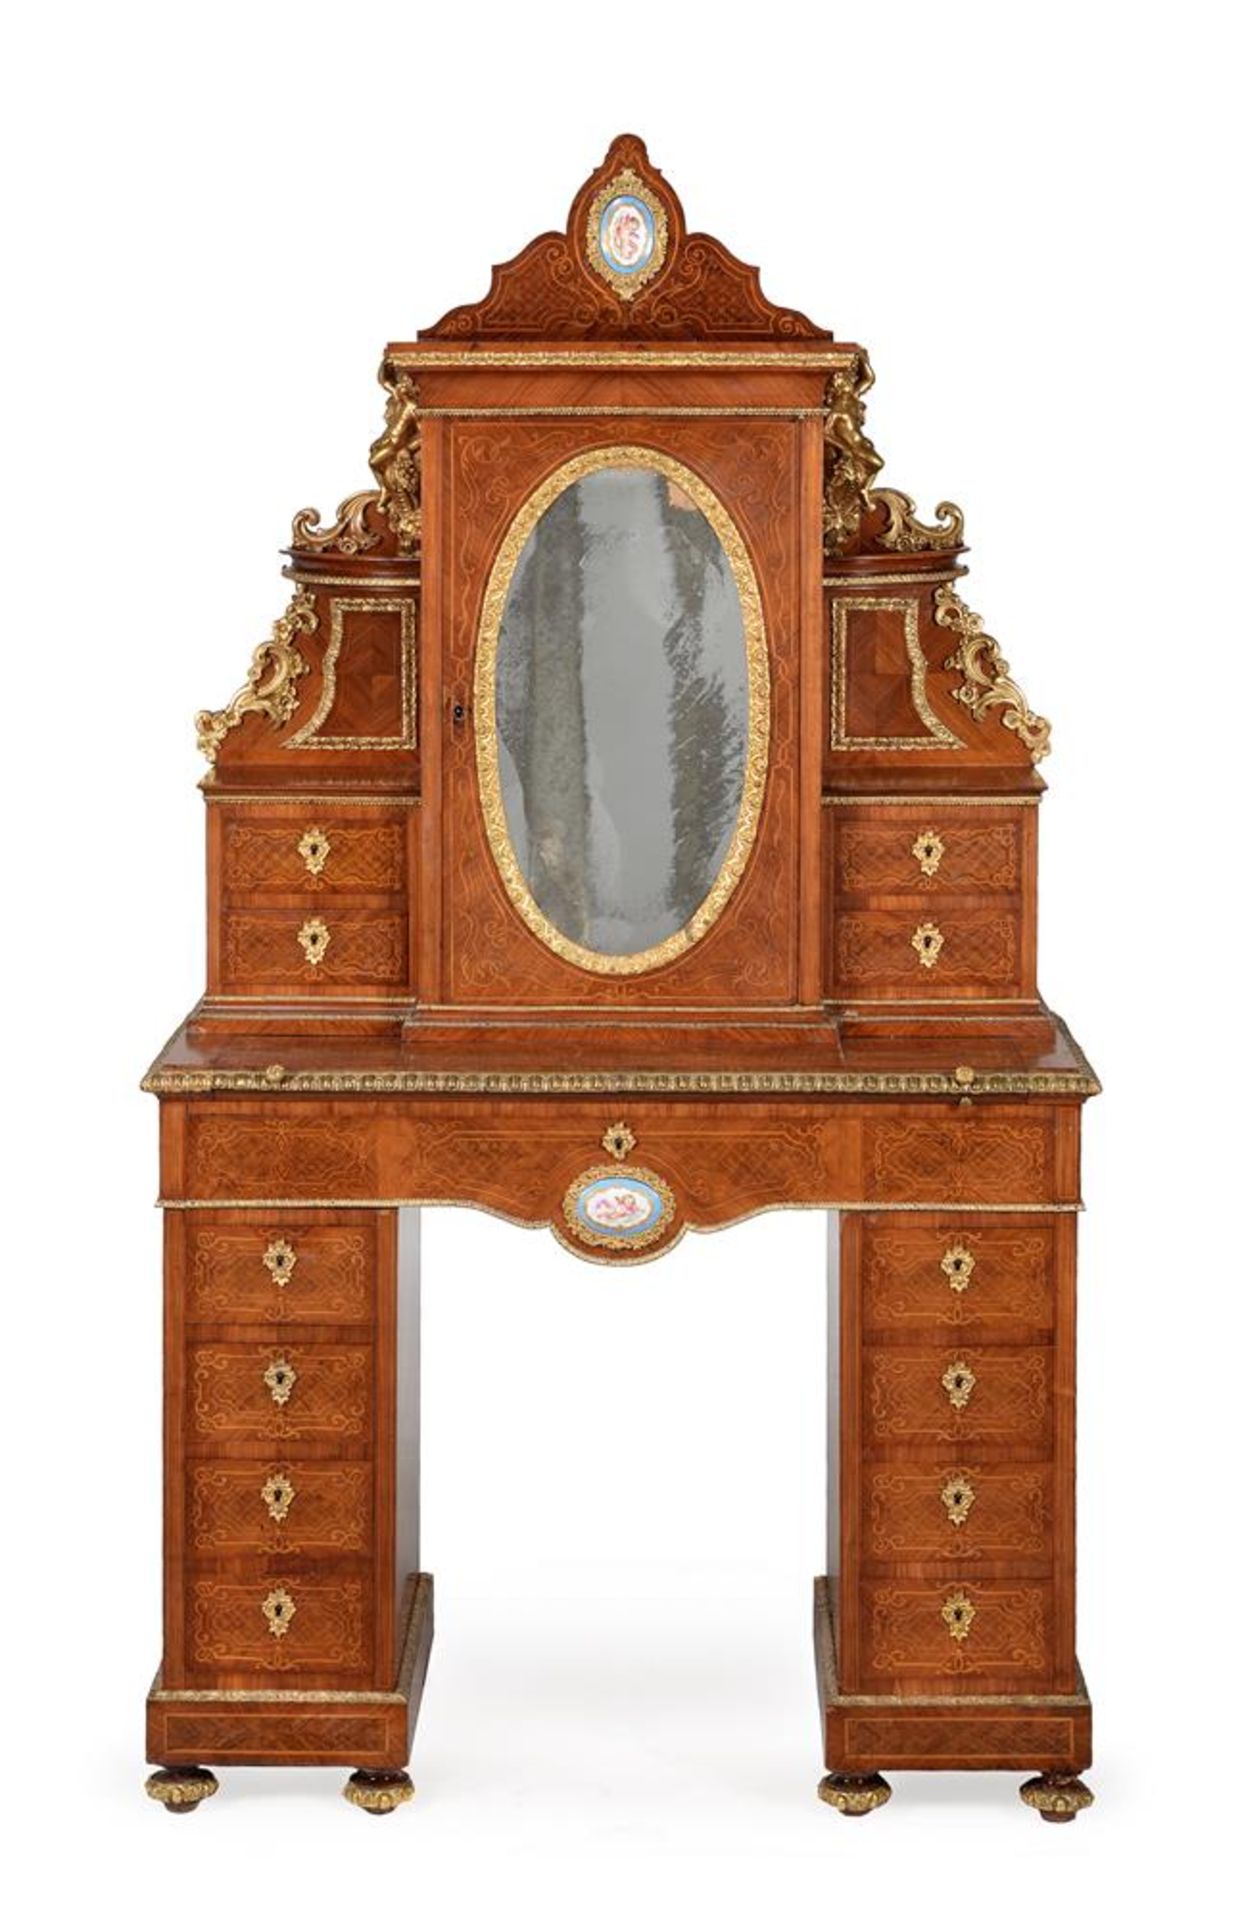 Y A VICTORIAN TULIPWOOD, WALNUT, MARQUETRY, GILT METAL AND PORCELAIN MOUNTED CABINET, CIRCA 1875